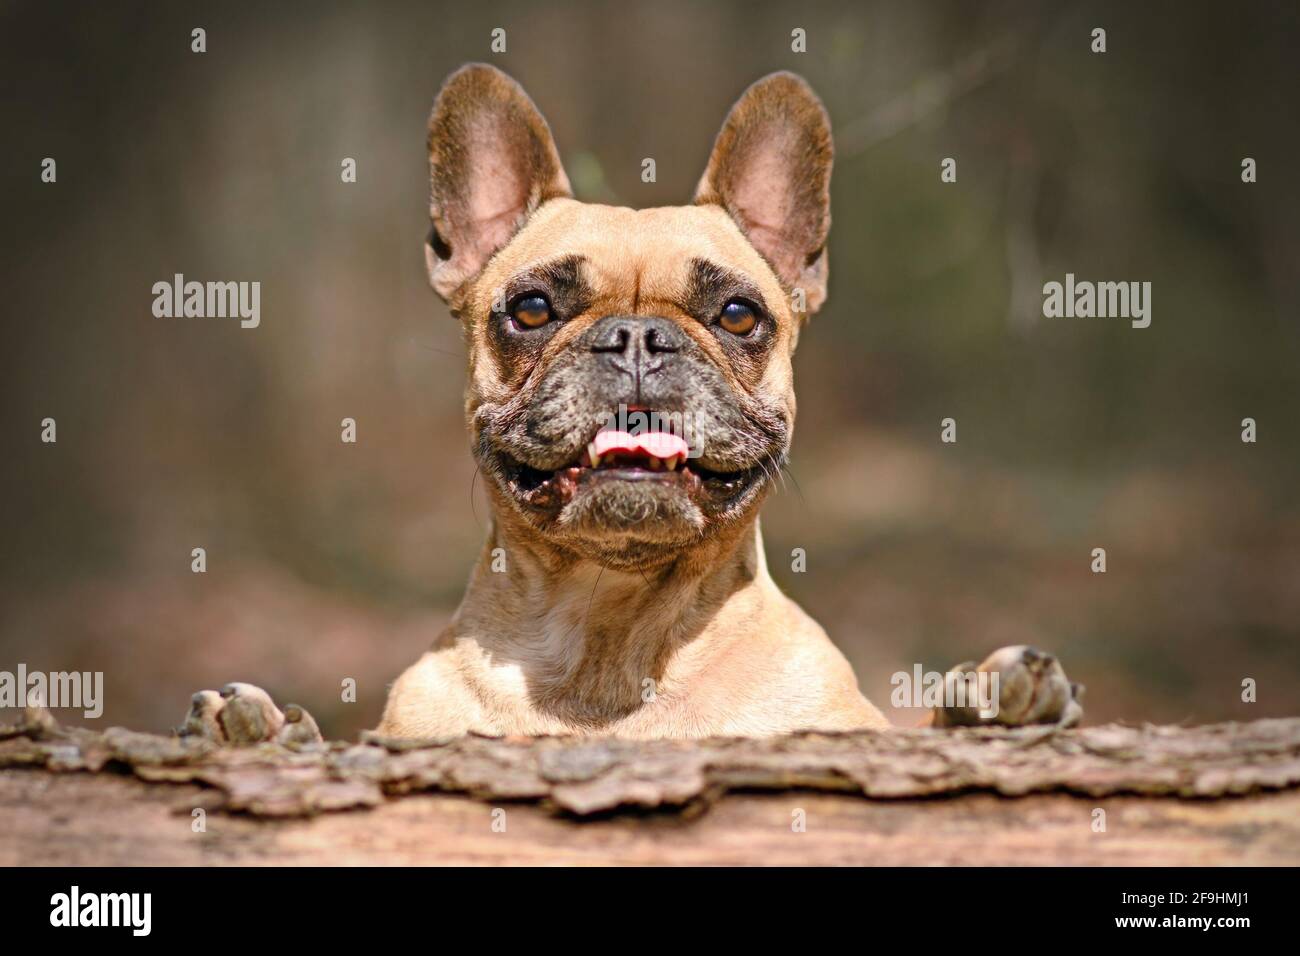 Cute happy French Bulldog dog looking over fallen tree trunk Stock Photo